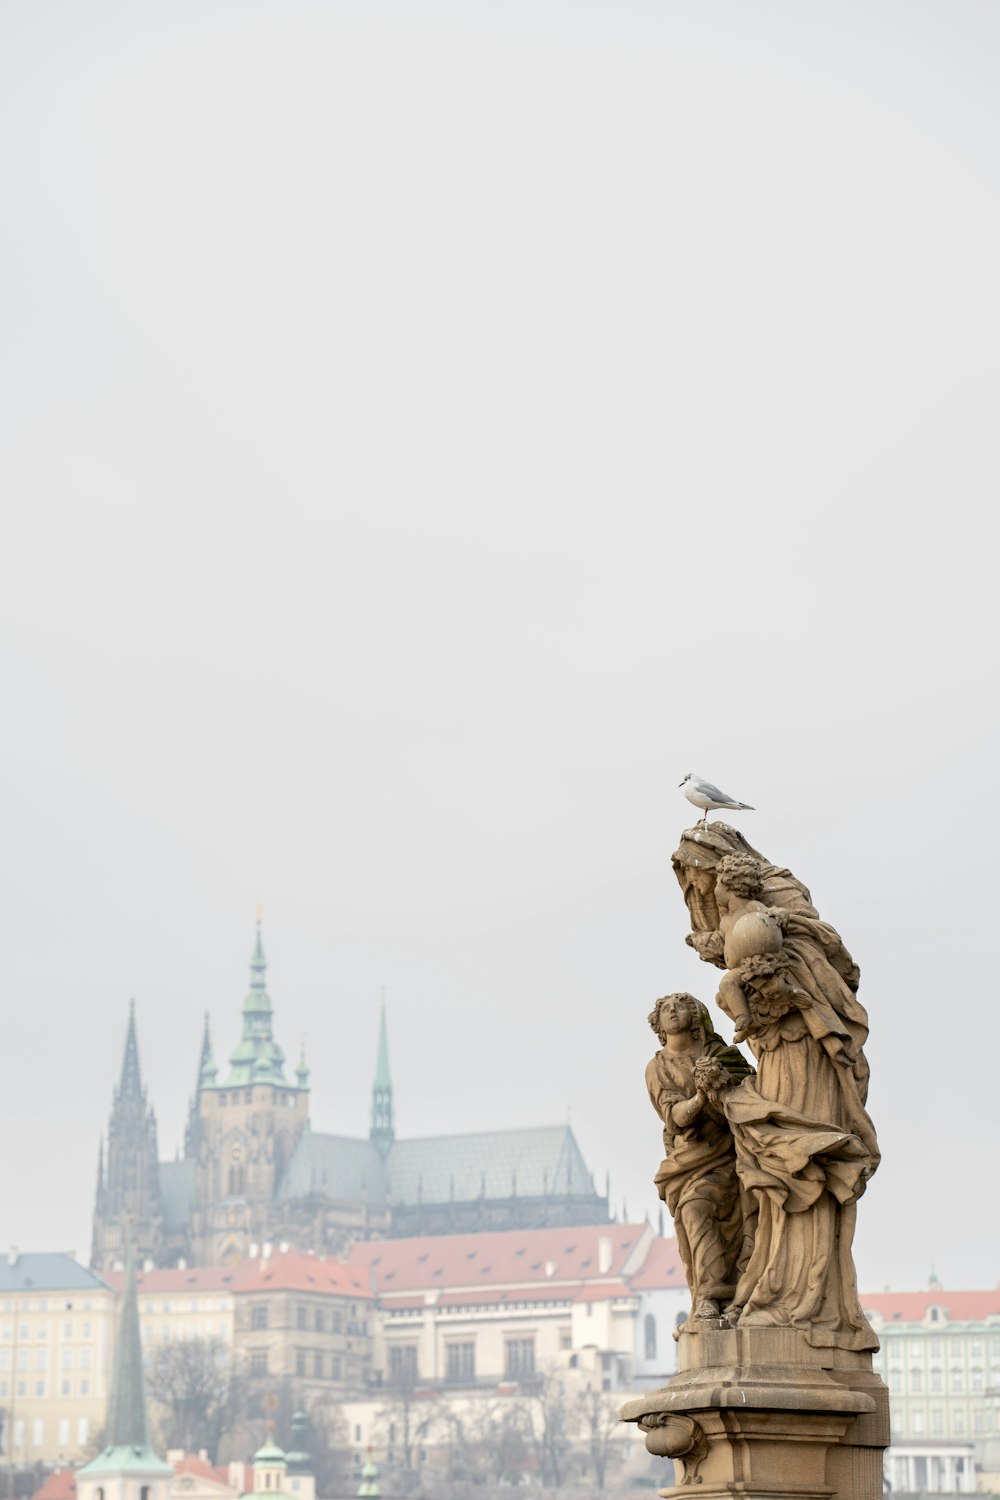 a bird perched on top of a statue in front of a castle